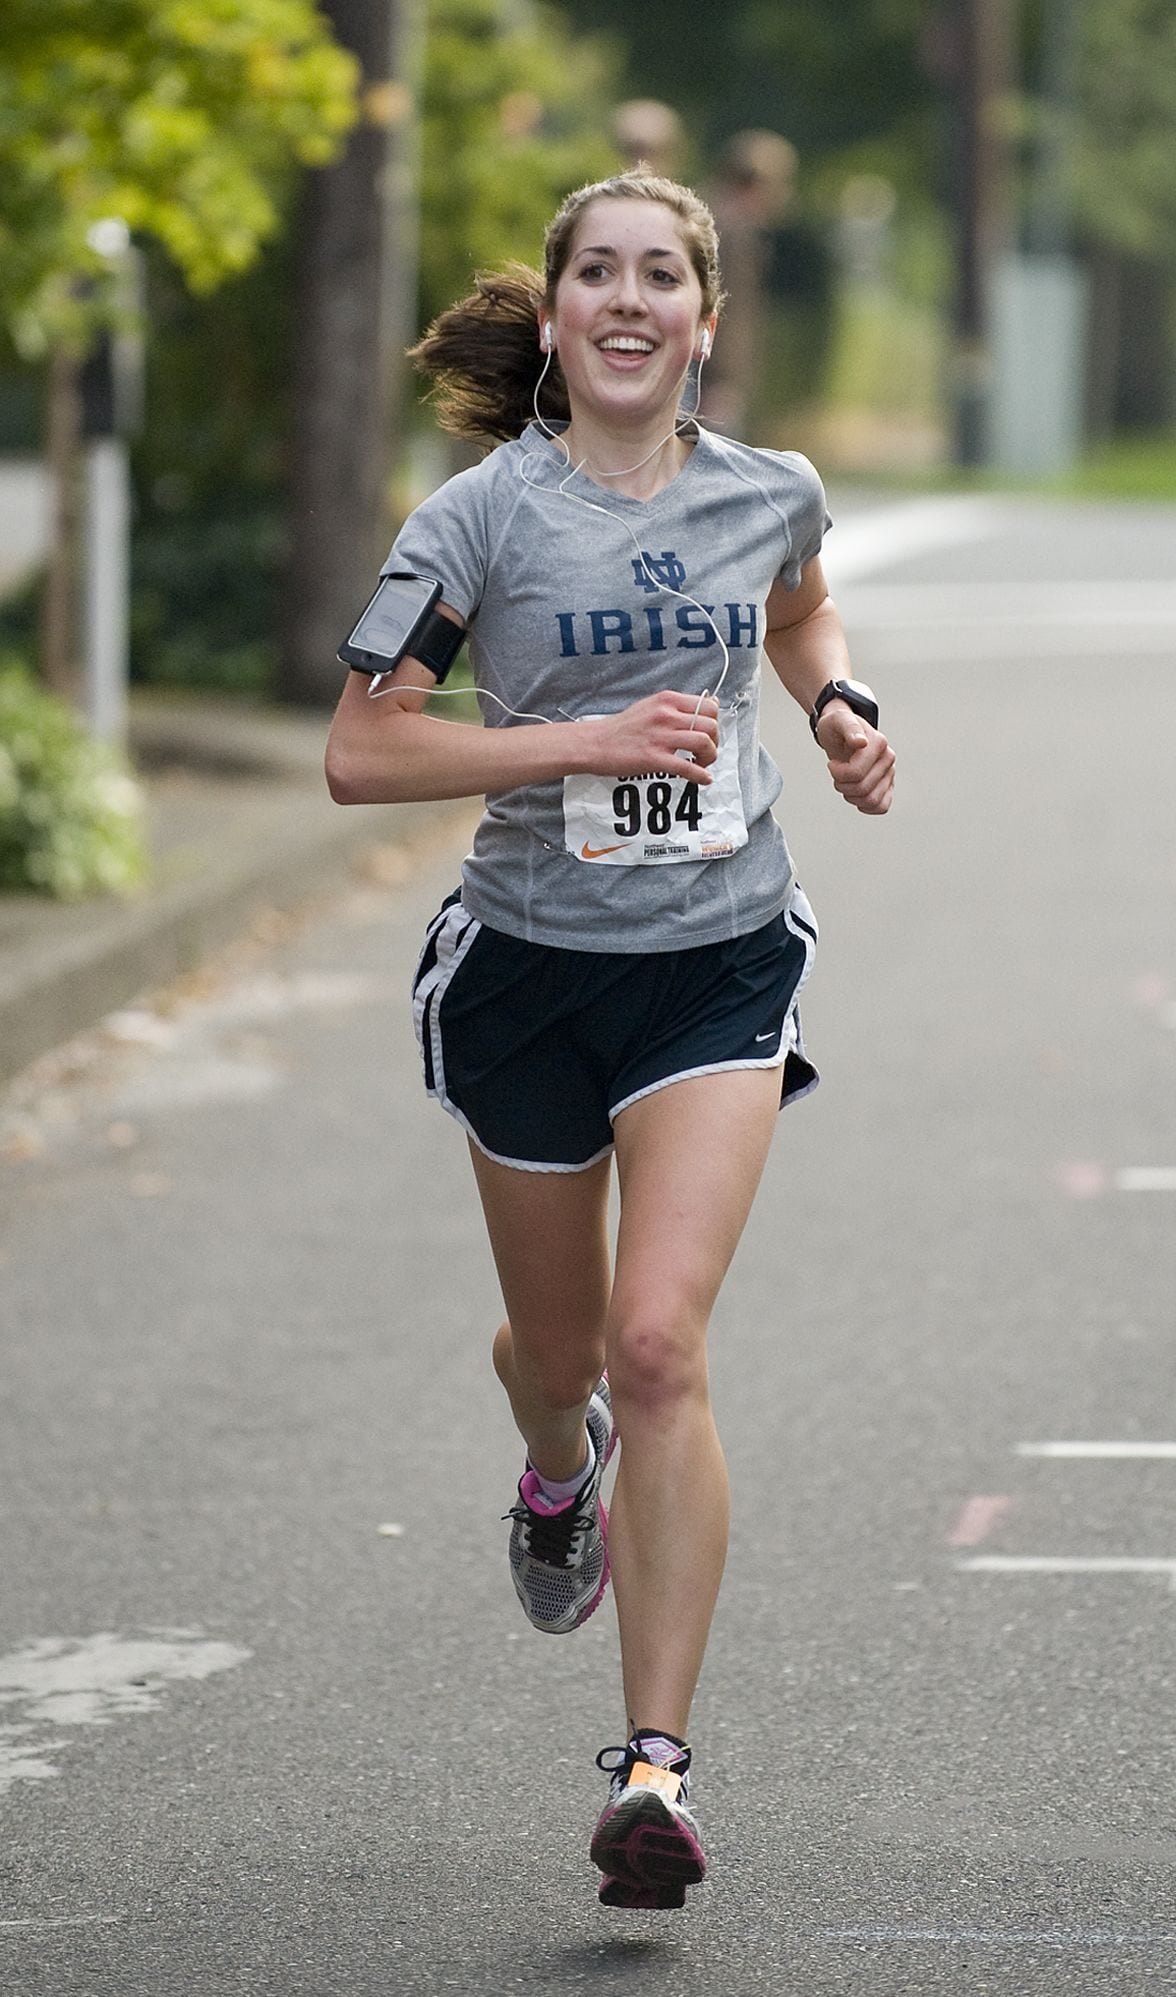 Carolyn Green of Ridgefield, a sophomore at Notre Dame, runs to victory Sunday in the Girlfriends Half Marathon in Vancouver.